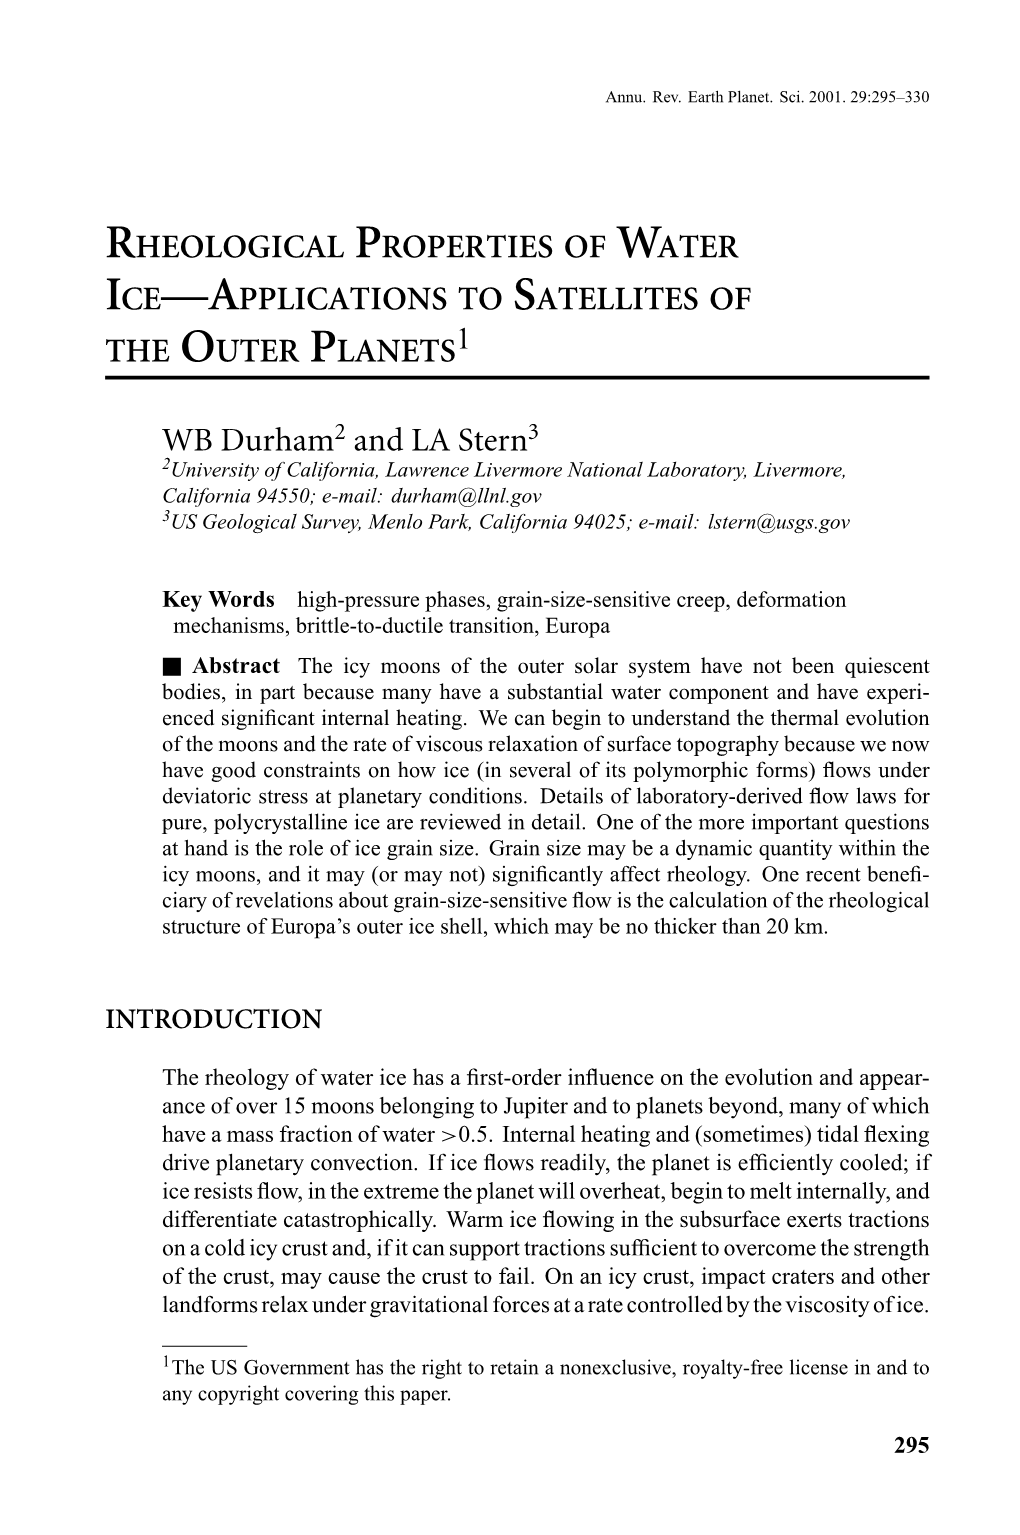 Rheological Properties of Water Ice—Applications to Satellites of the Outer Planets1